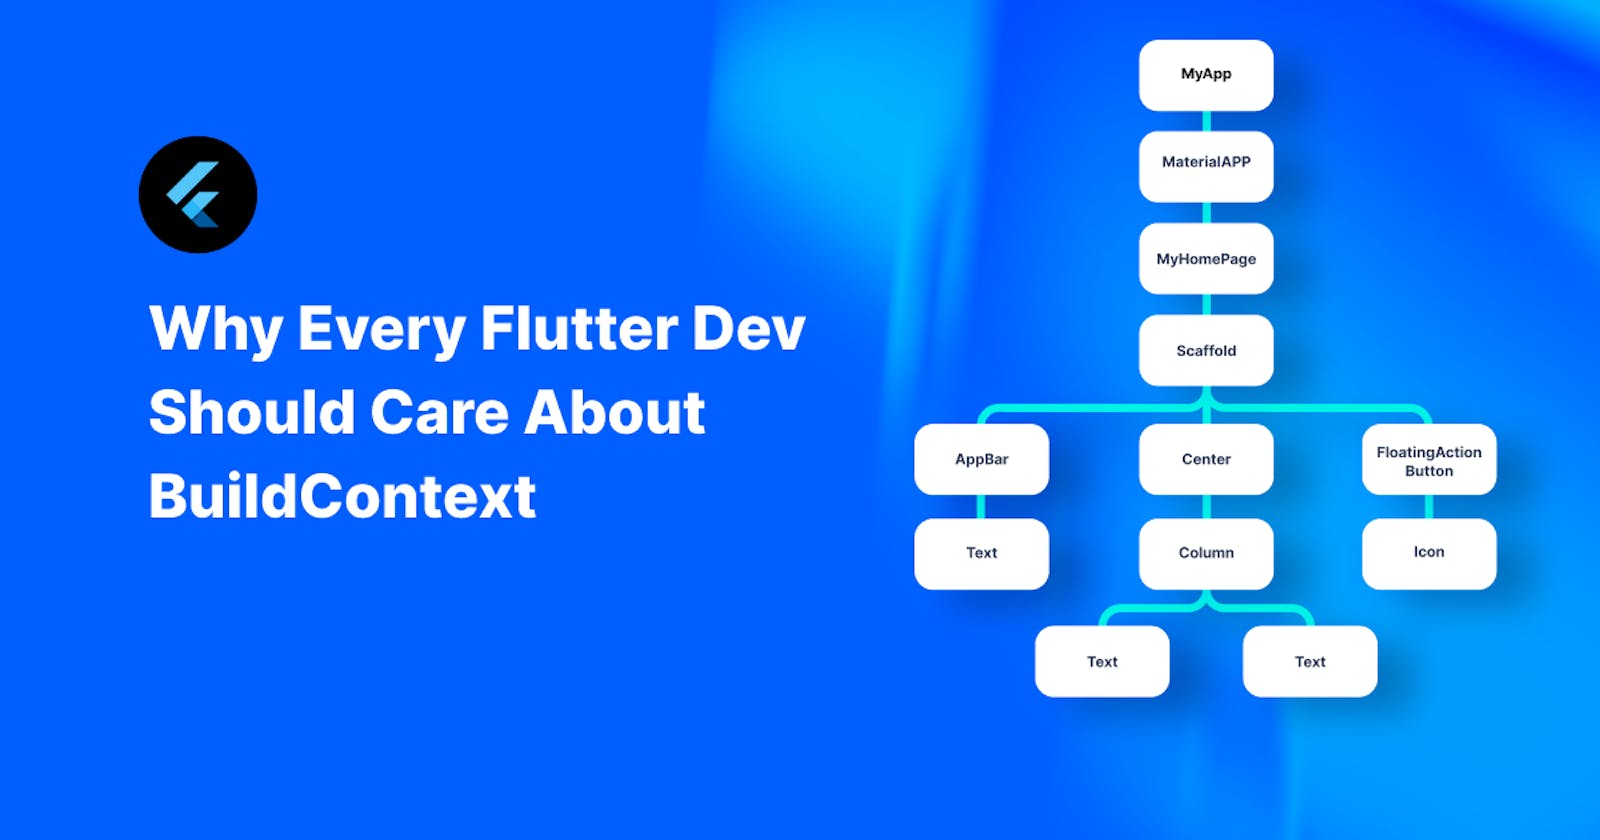 Why Every Flutter Dev Should Care About BuildContext